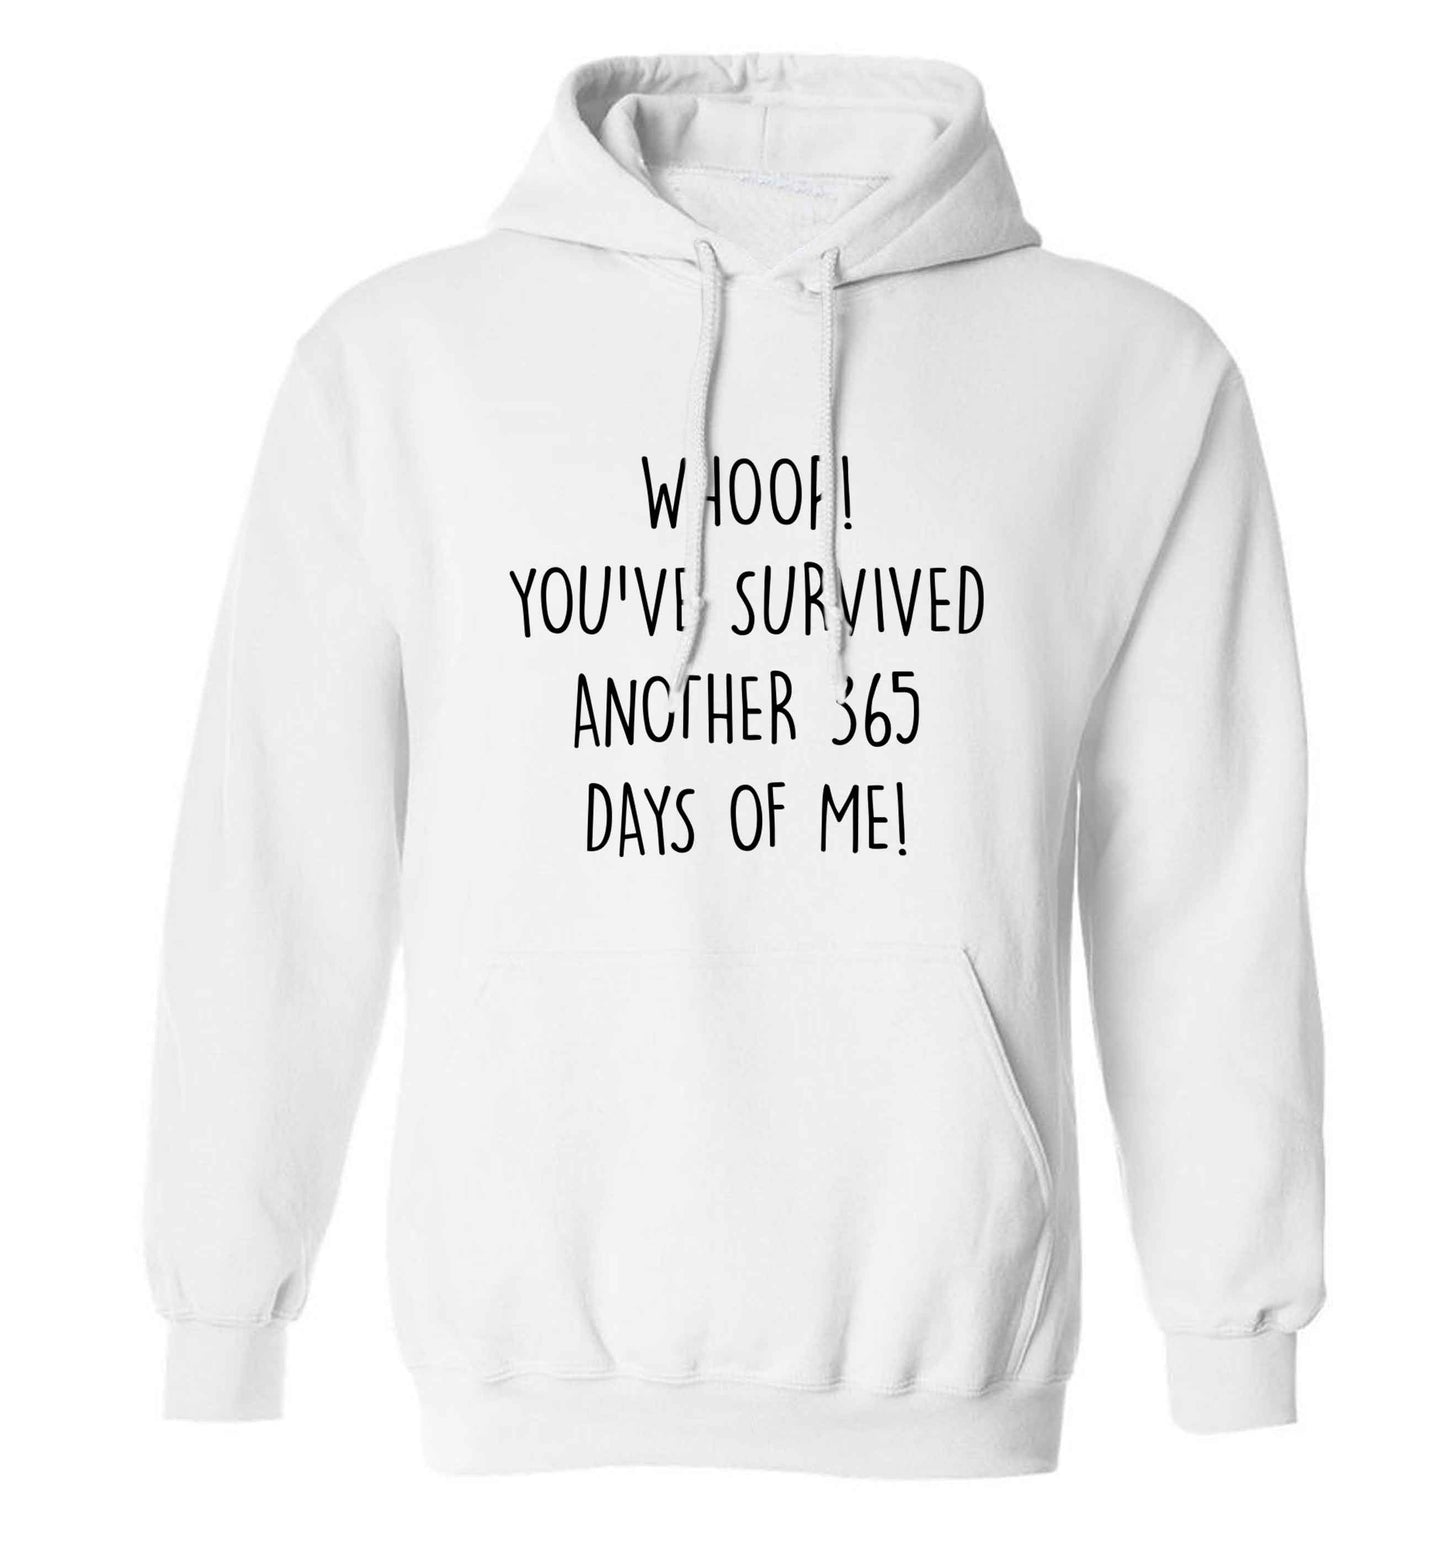 Whoop! You've survived another 365 days with me! adults unisex white hoodie 2XL